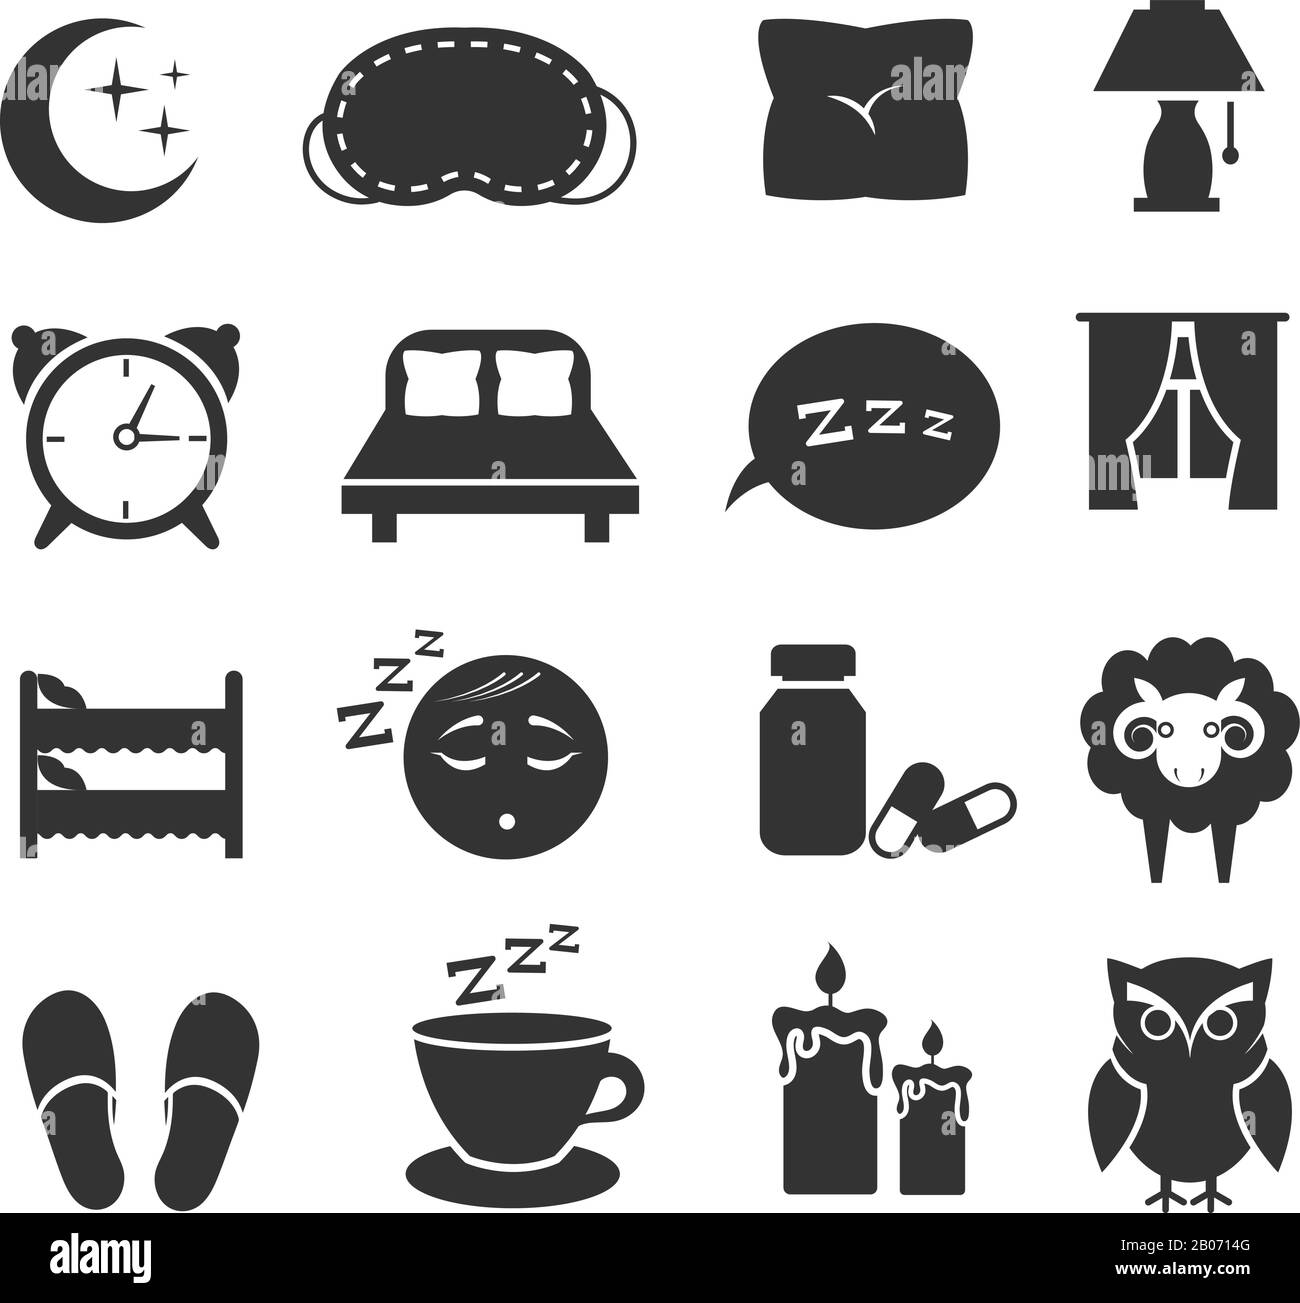 Sleep, night relax, pillow, bed, moon, owl, zzz vector icons sleeping symbols set. Bedroom for rest, clock and moon with star illustration Stock Vector